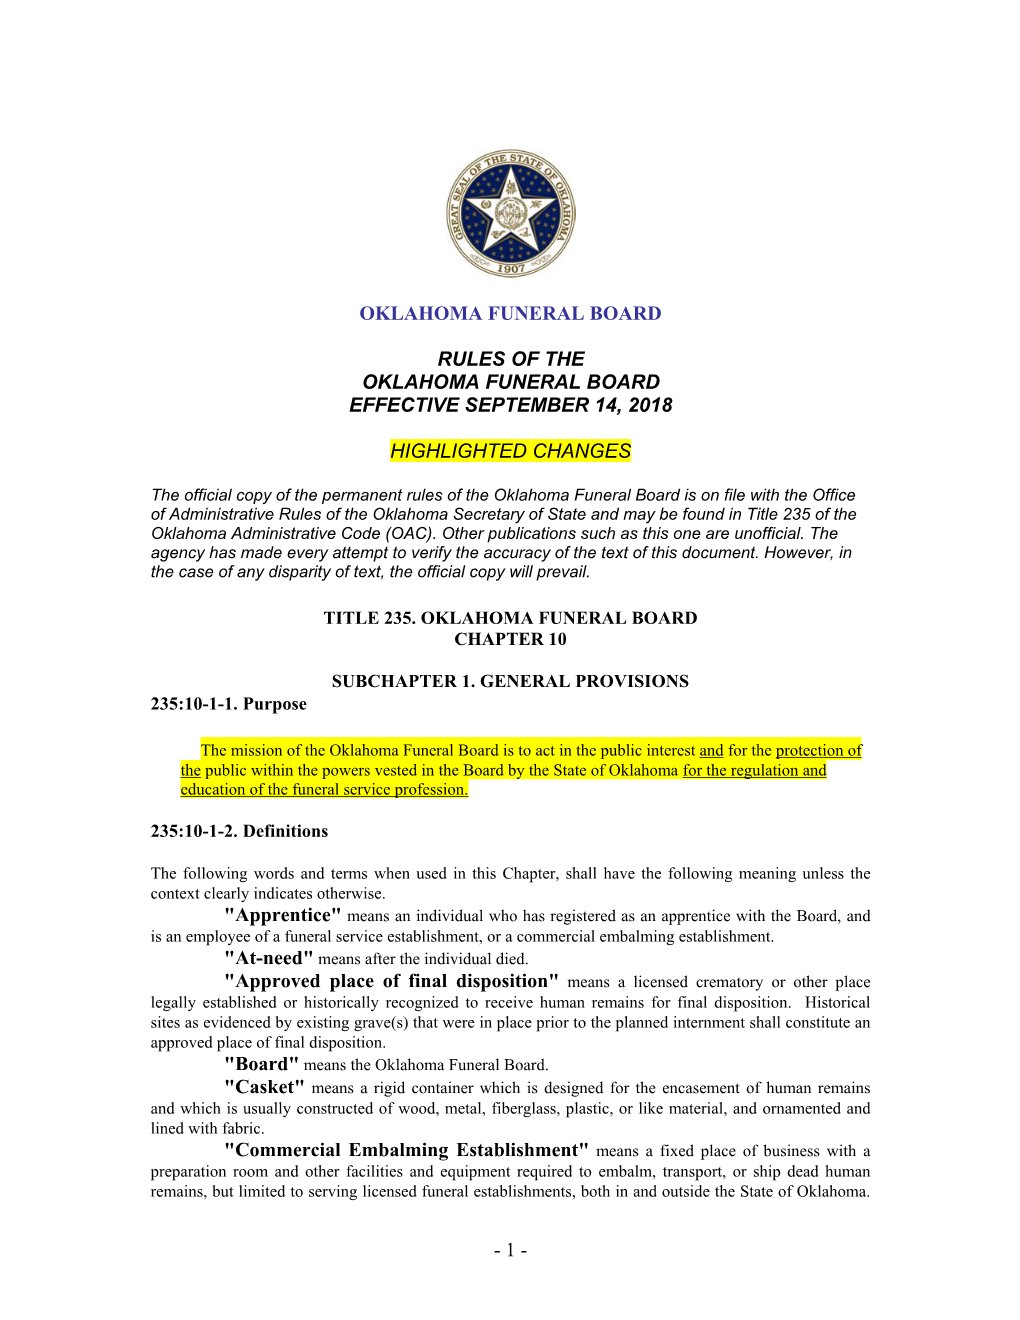 Rules of the Oklahoma Funeral Board Effective September 14, 2018